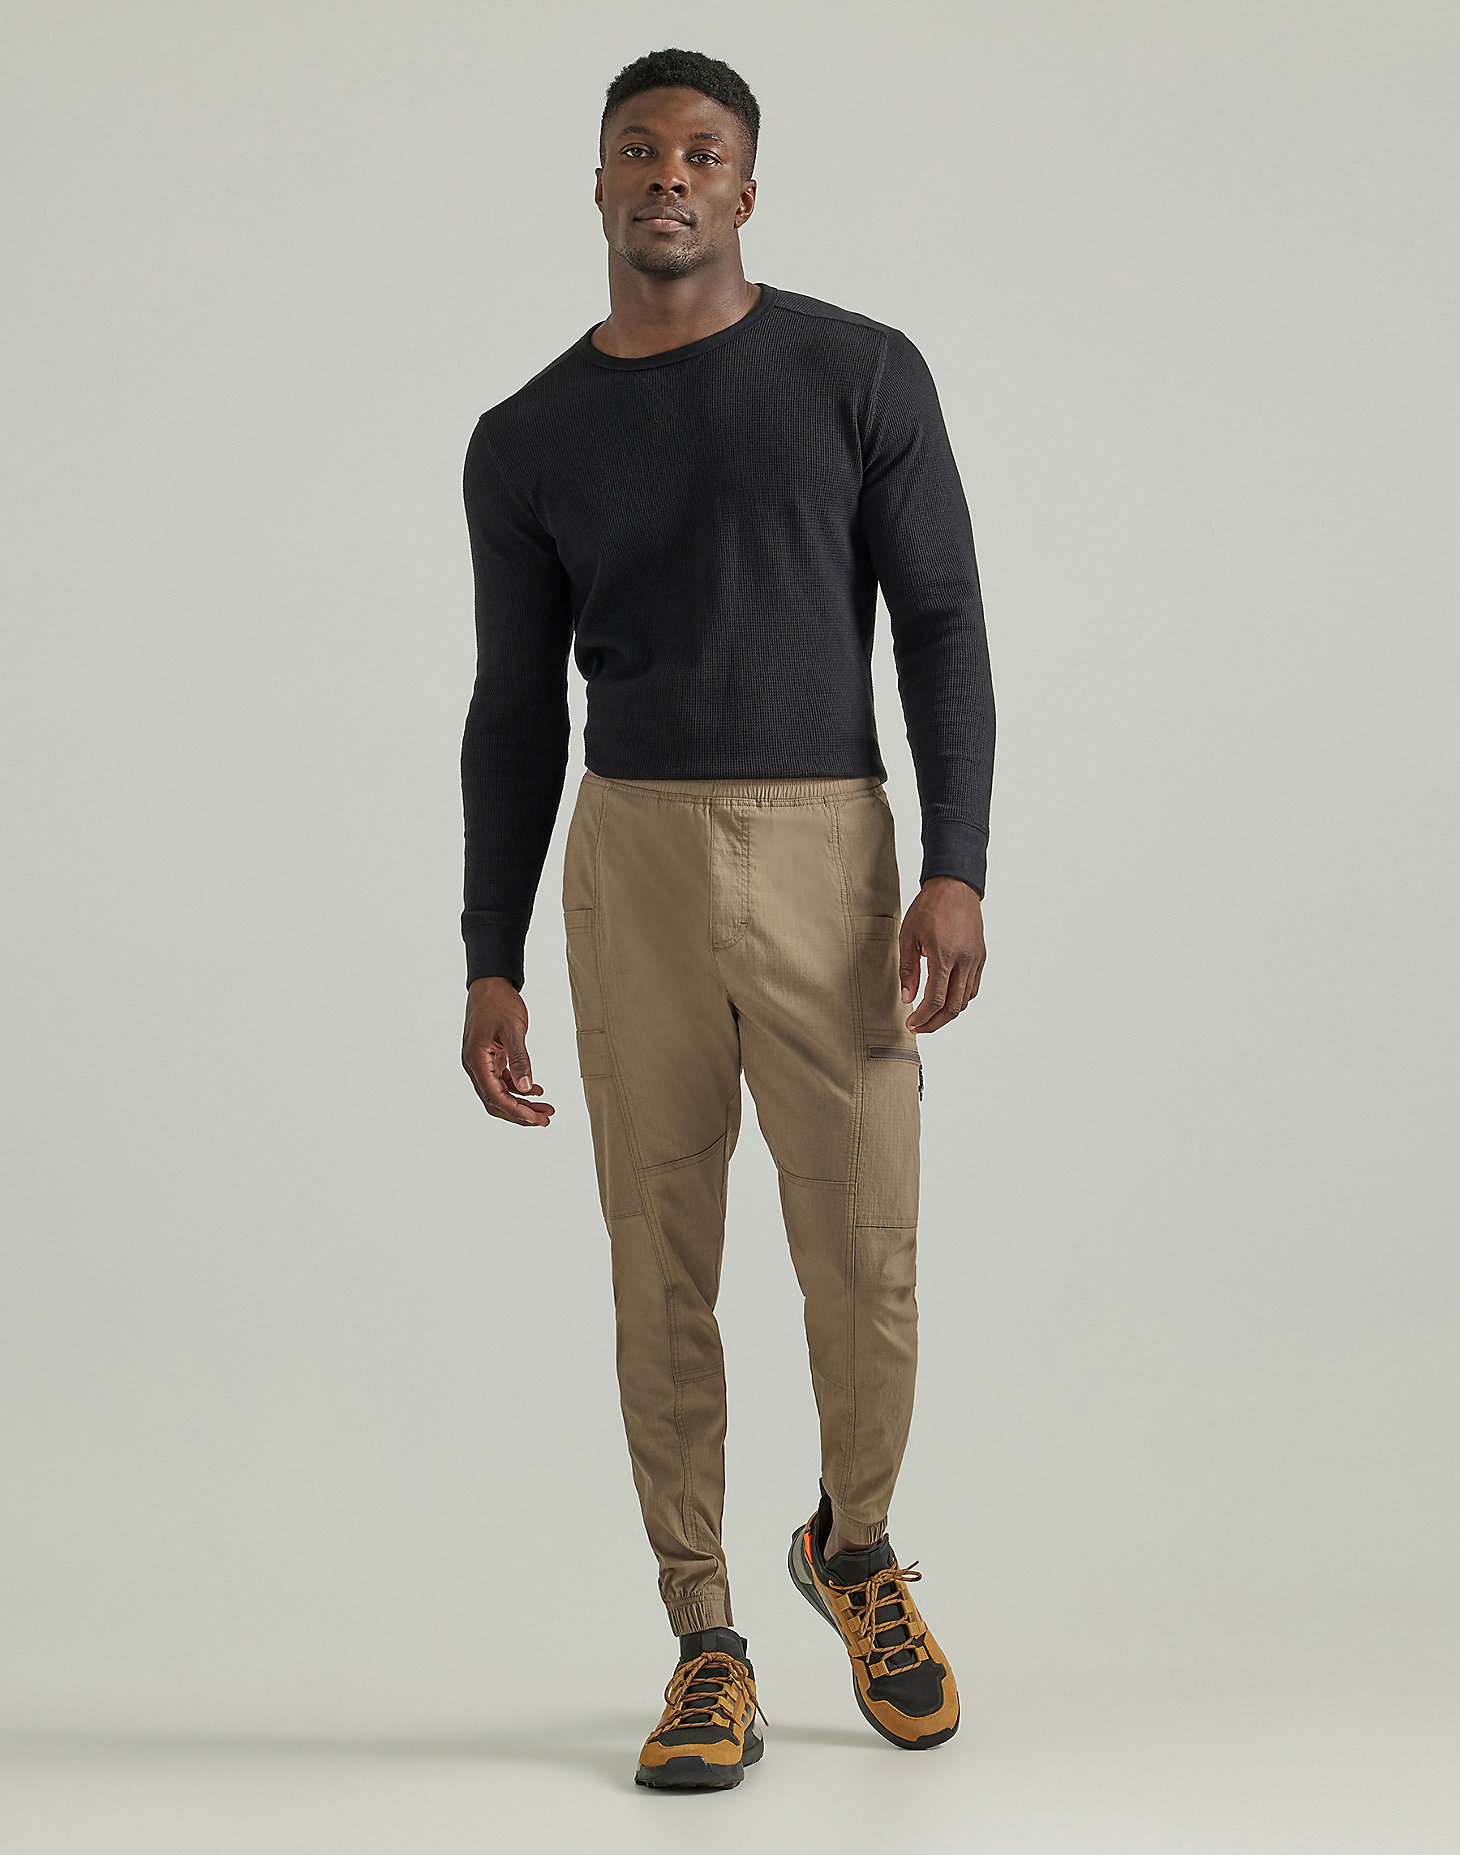 Pull On Tapered Pant in Bungee Cord alternative view 3